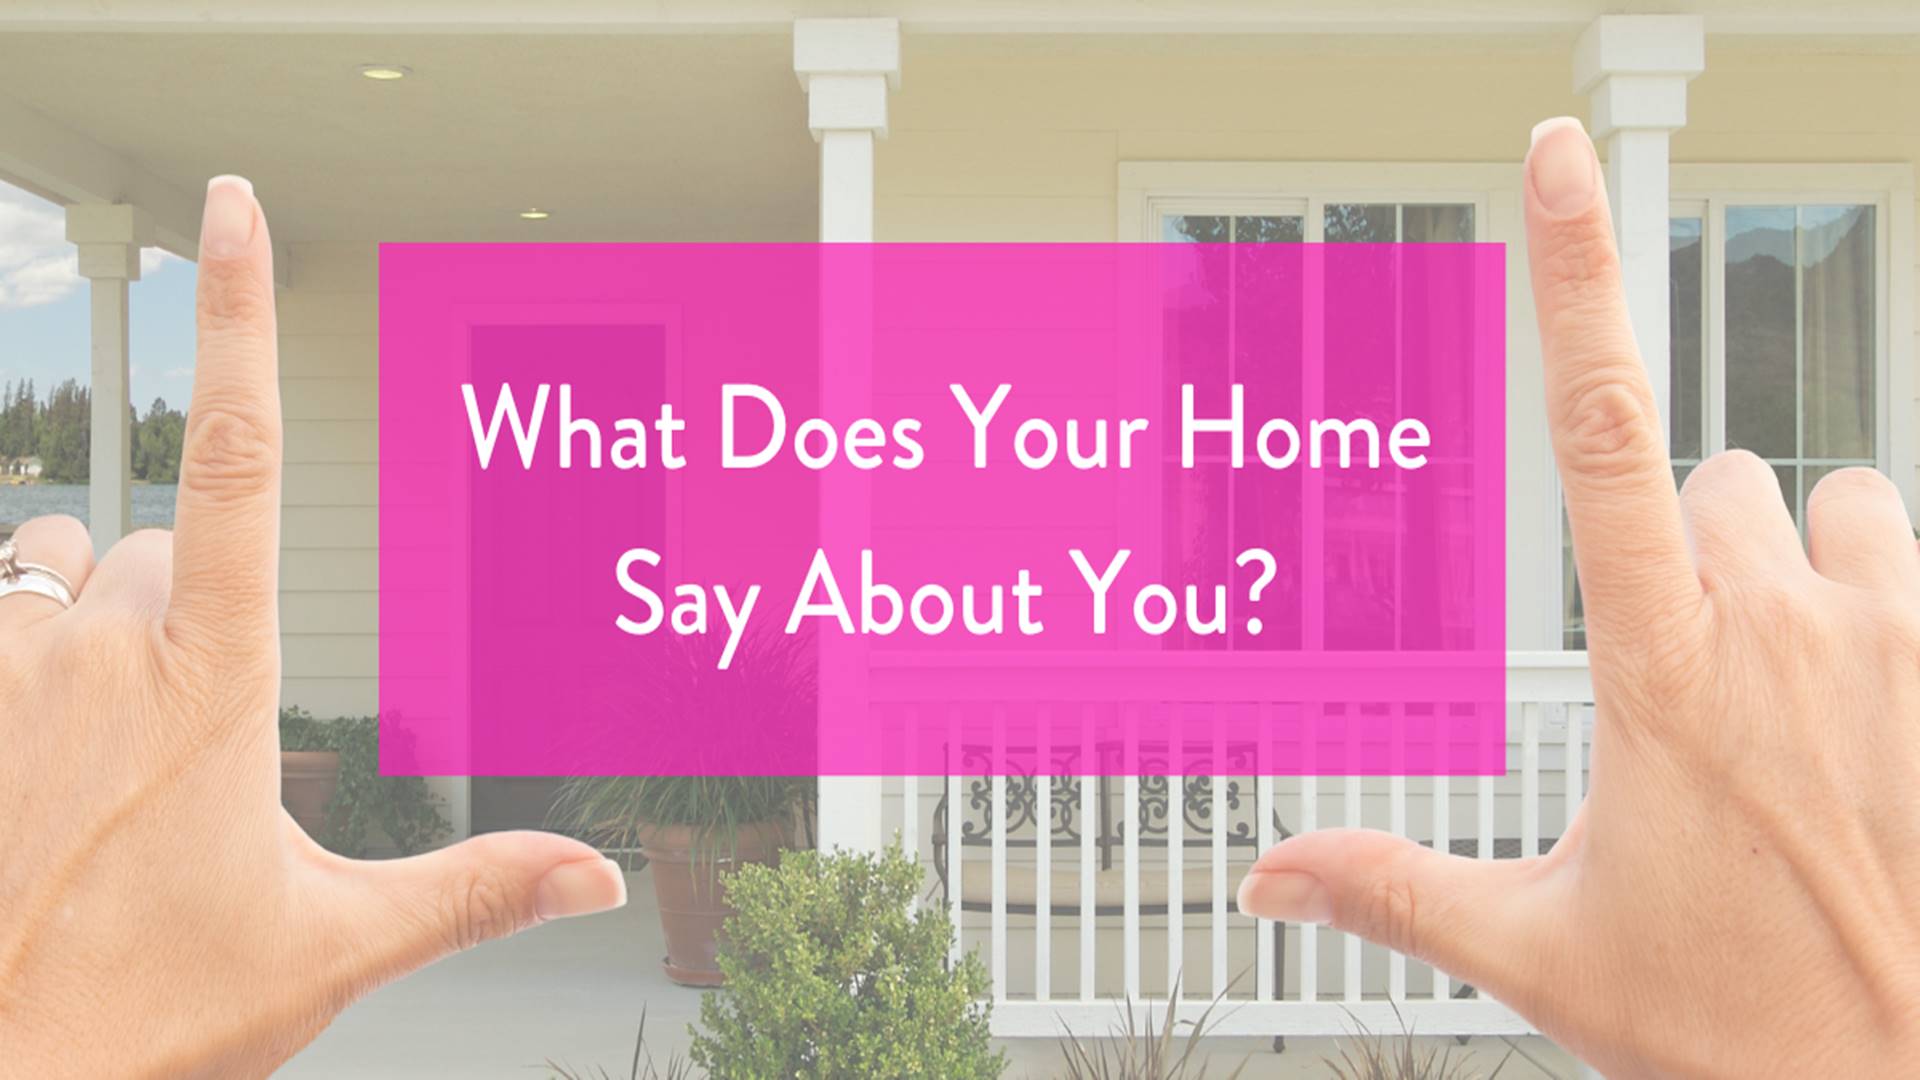 What Does Your Home Say About You?